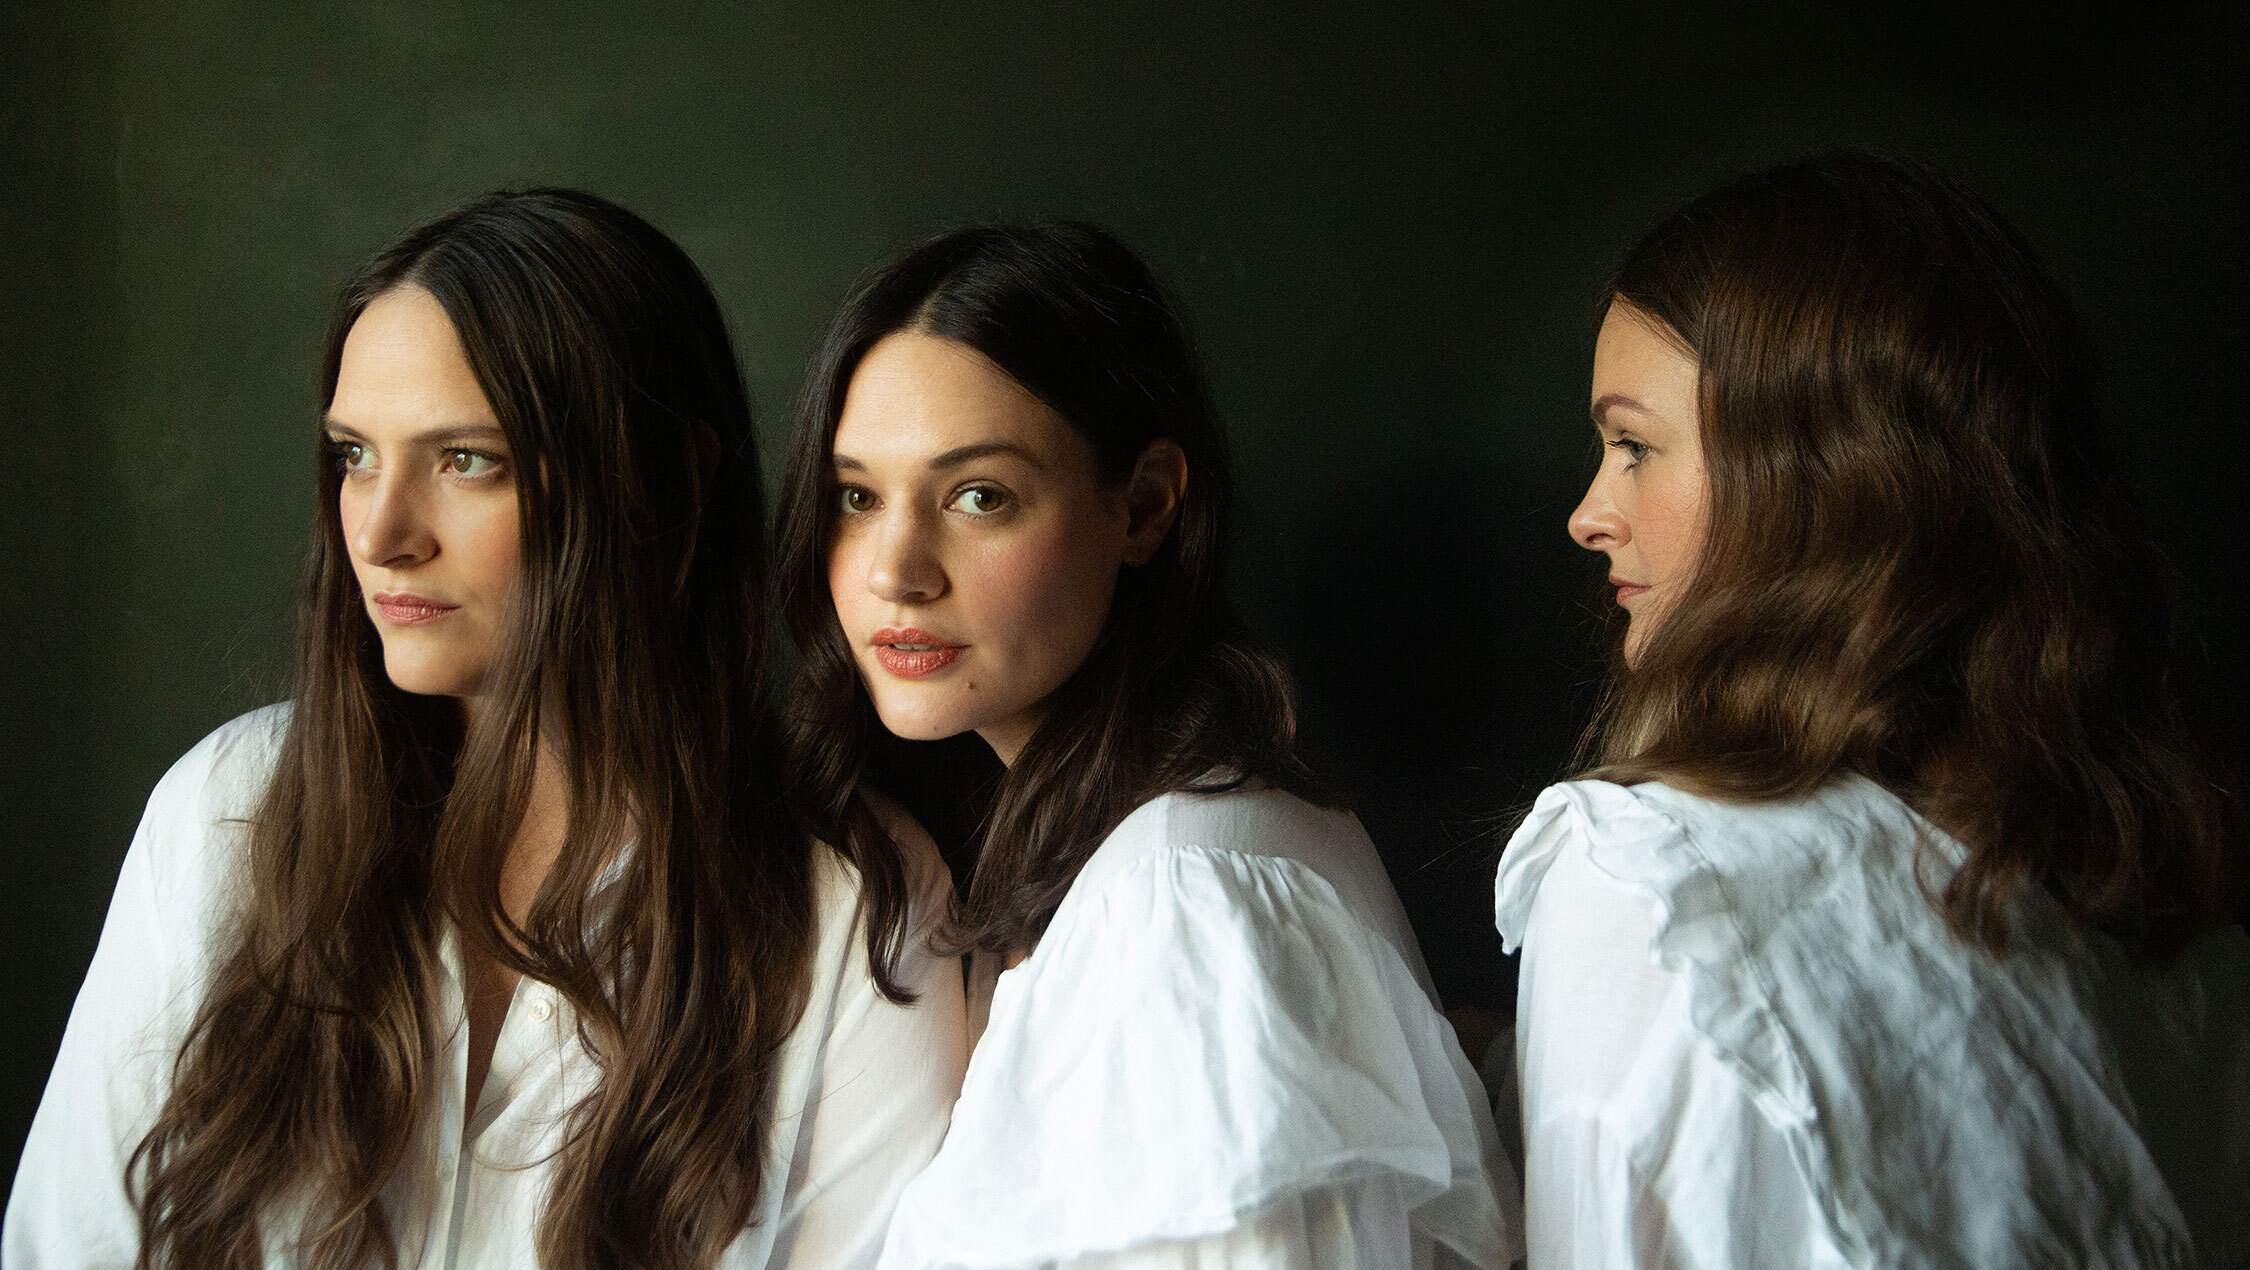 The Staves the Good Woman Header Image